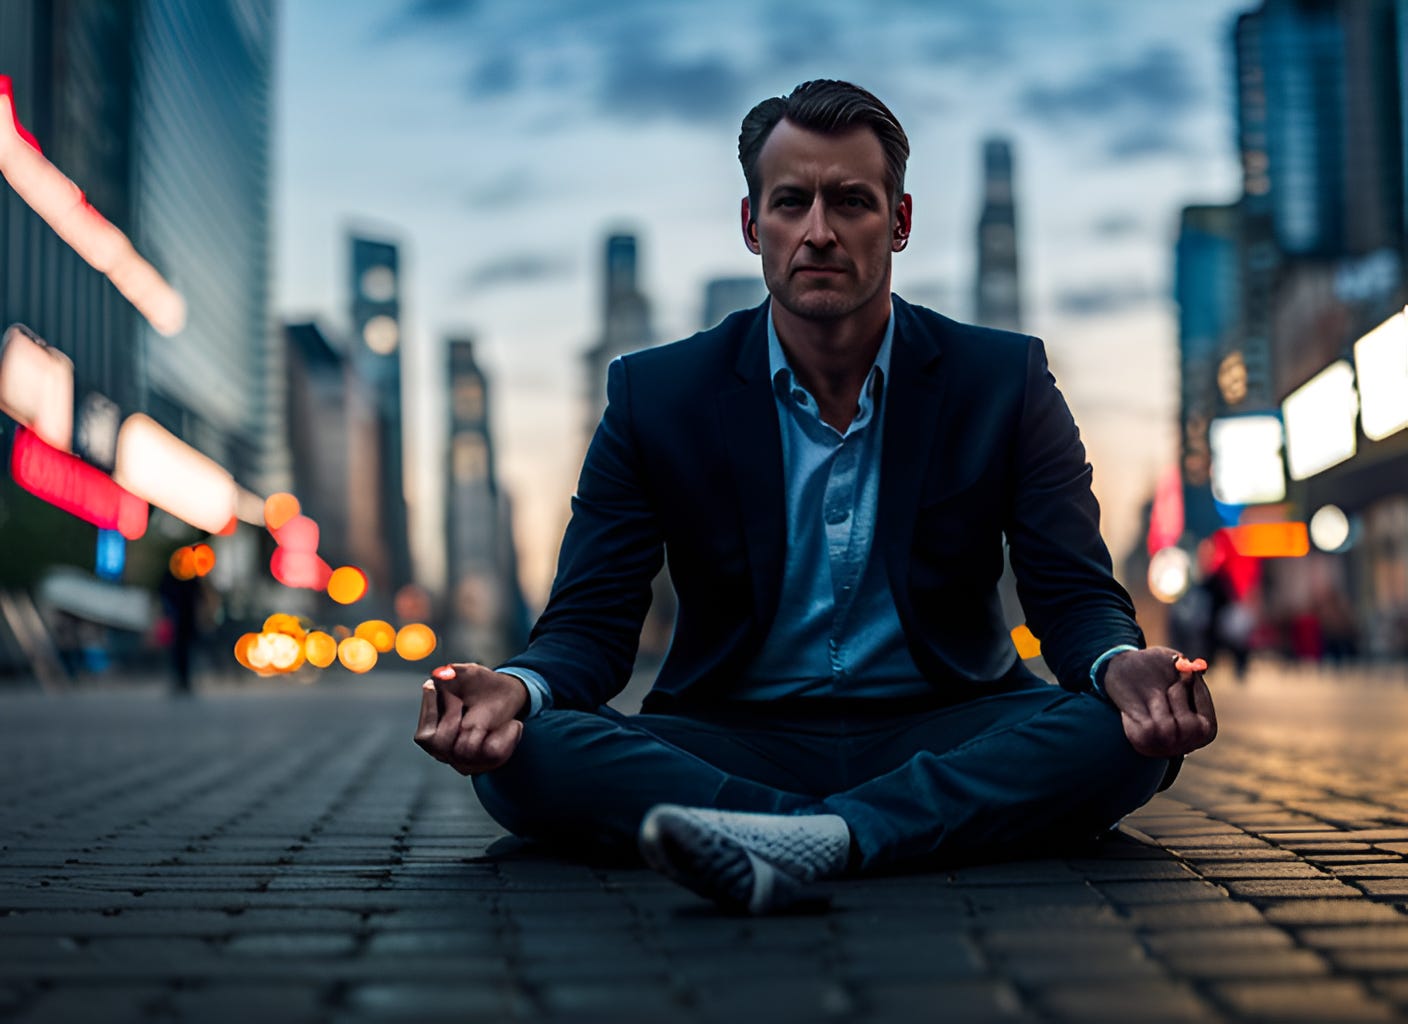 Meditation is simple and probably isn't what you think it is. Don't over-complicate things. Work with your limitations, circumstances, character, mind, and body.